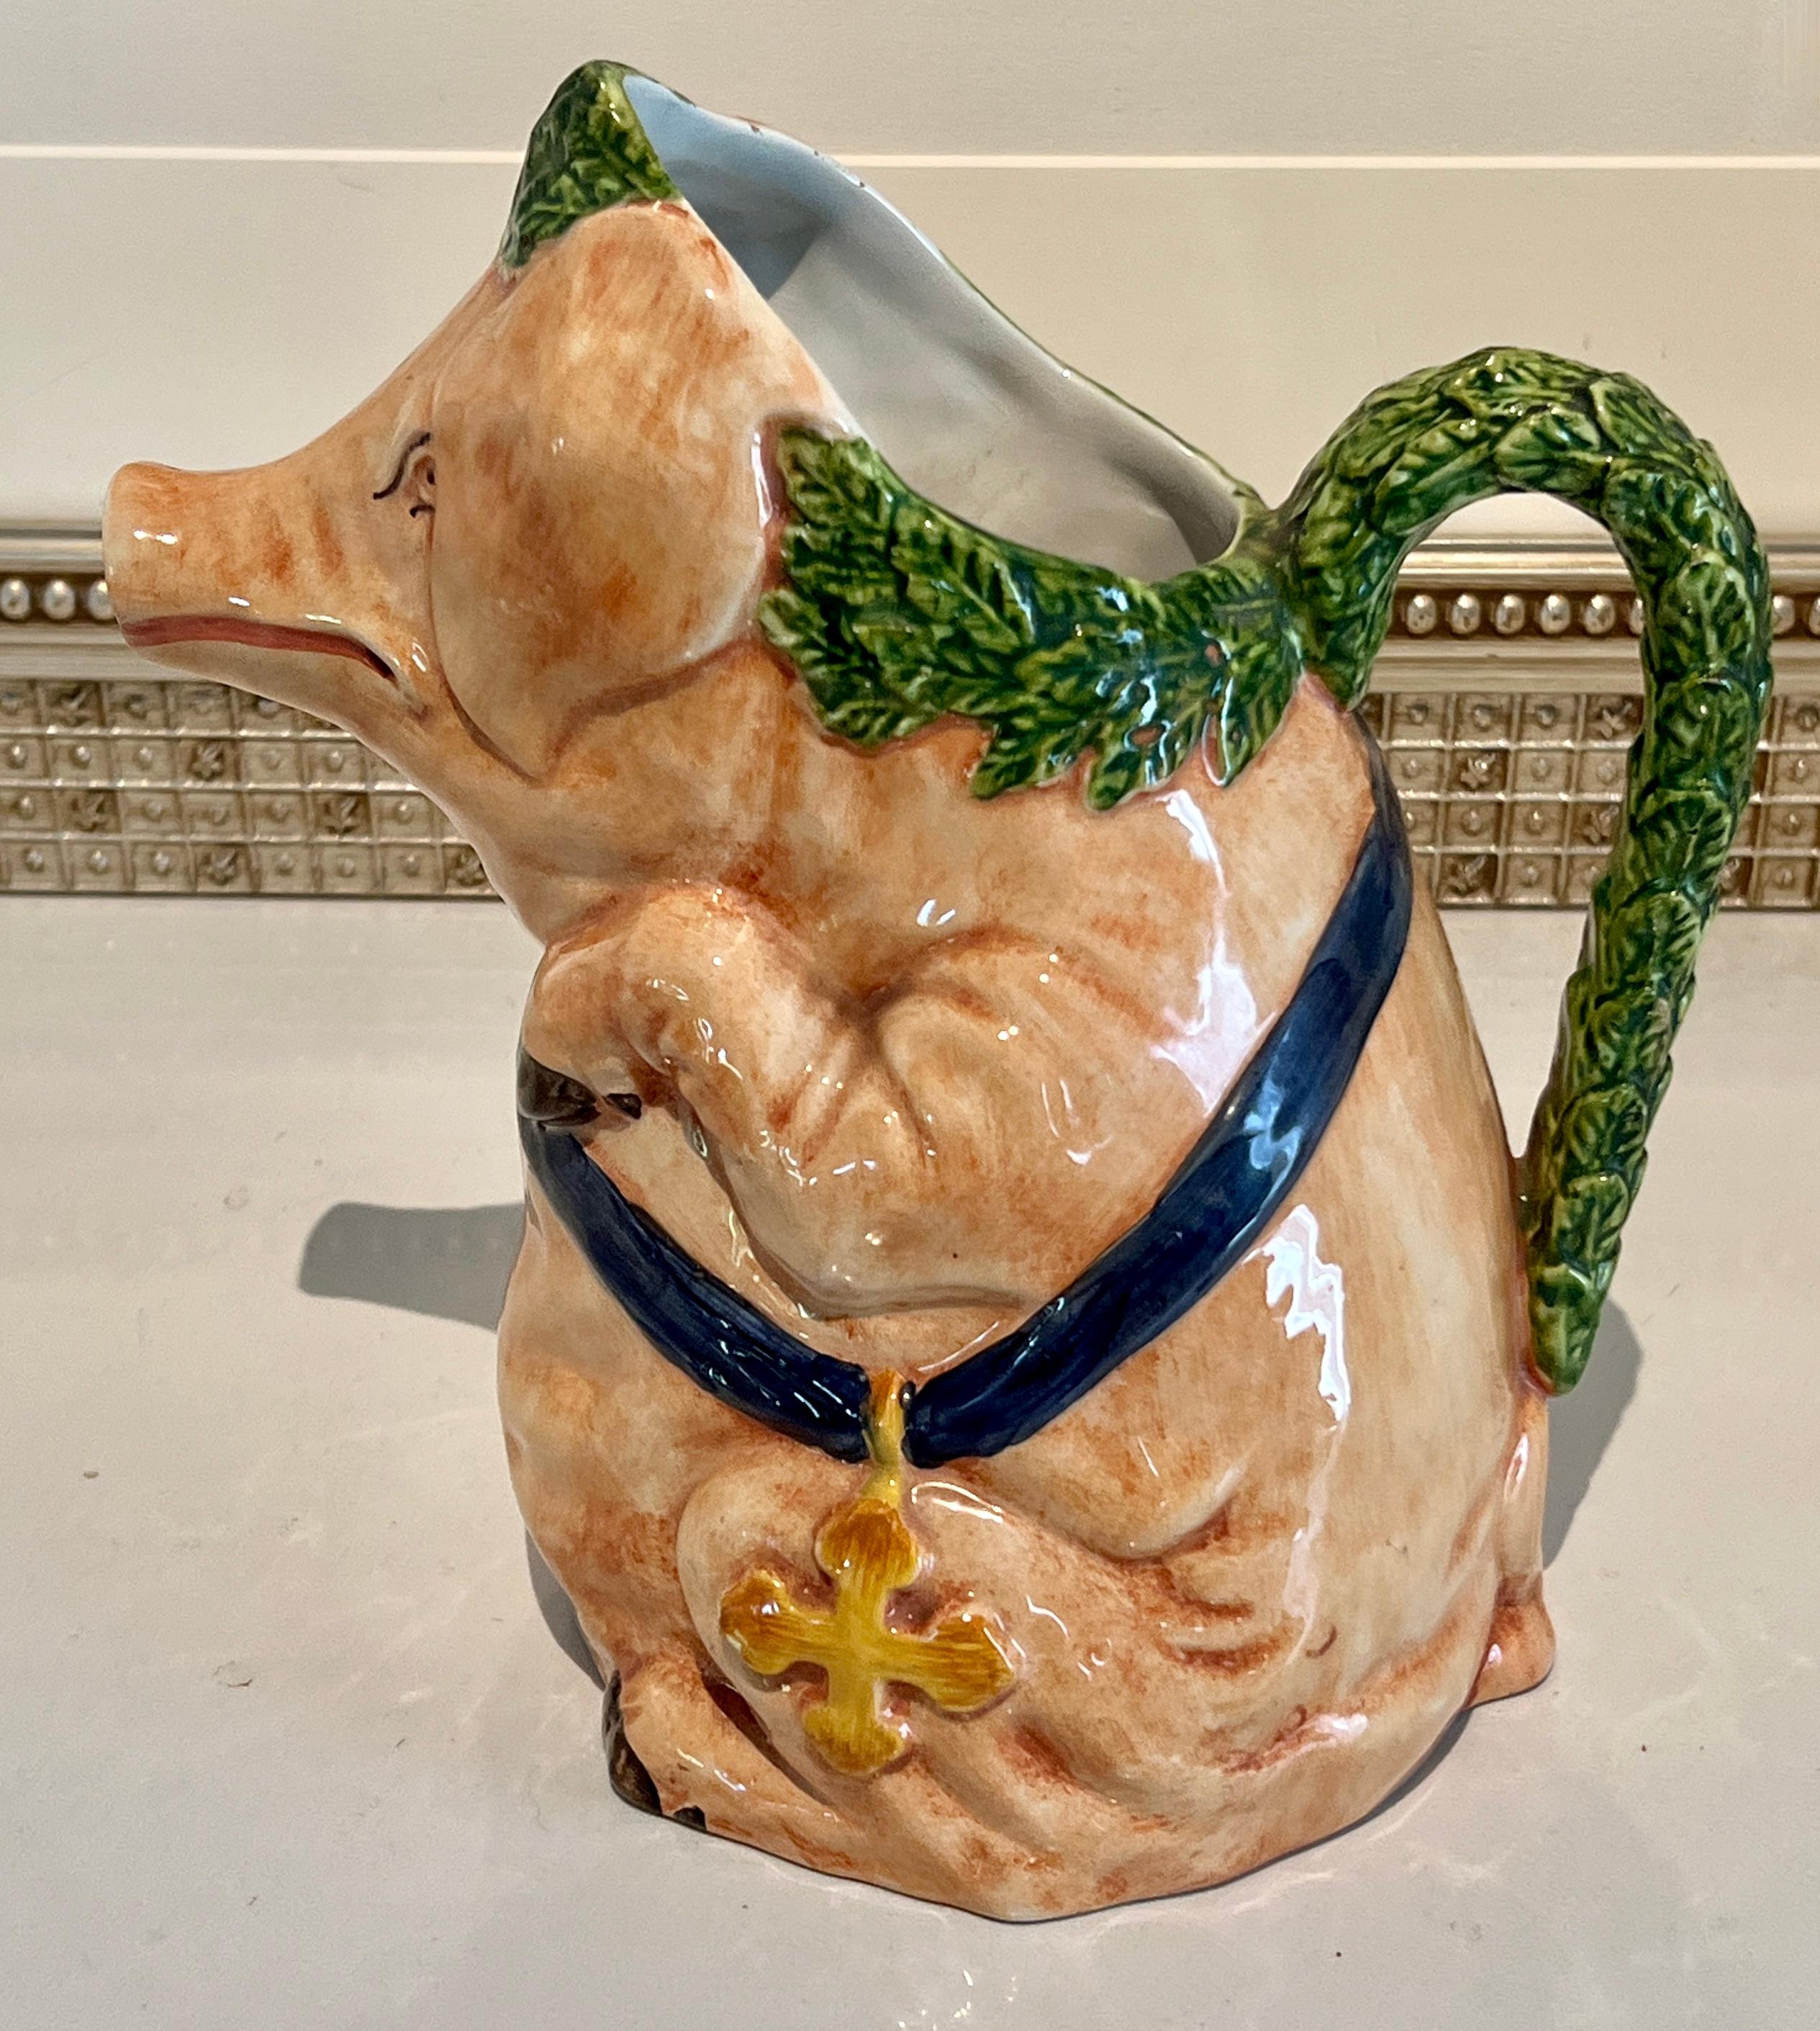 A beautifully crafted Italian Majolica Pig Pitcher.  The piece is a wonderful and warm addition to any kitchen or bar area.  While very decorative, the pitcher is also practical and holds up to over a quart of juice or gravy.

Animal themes bring a